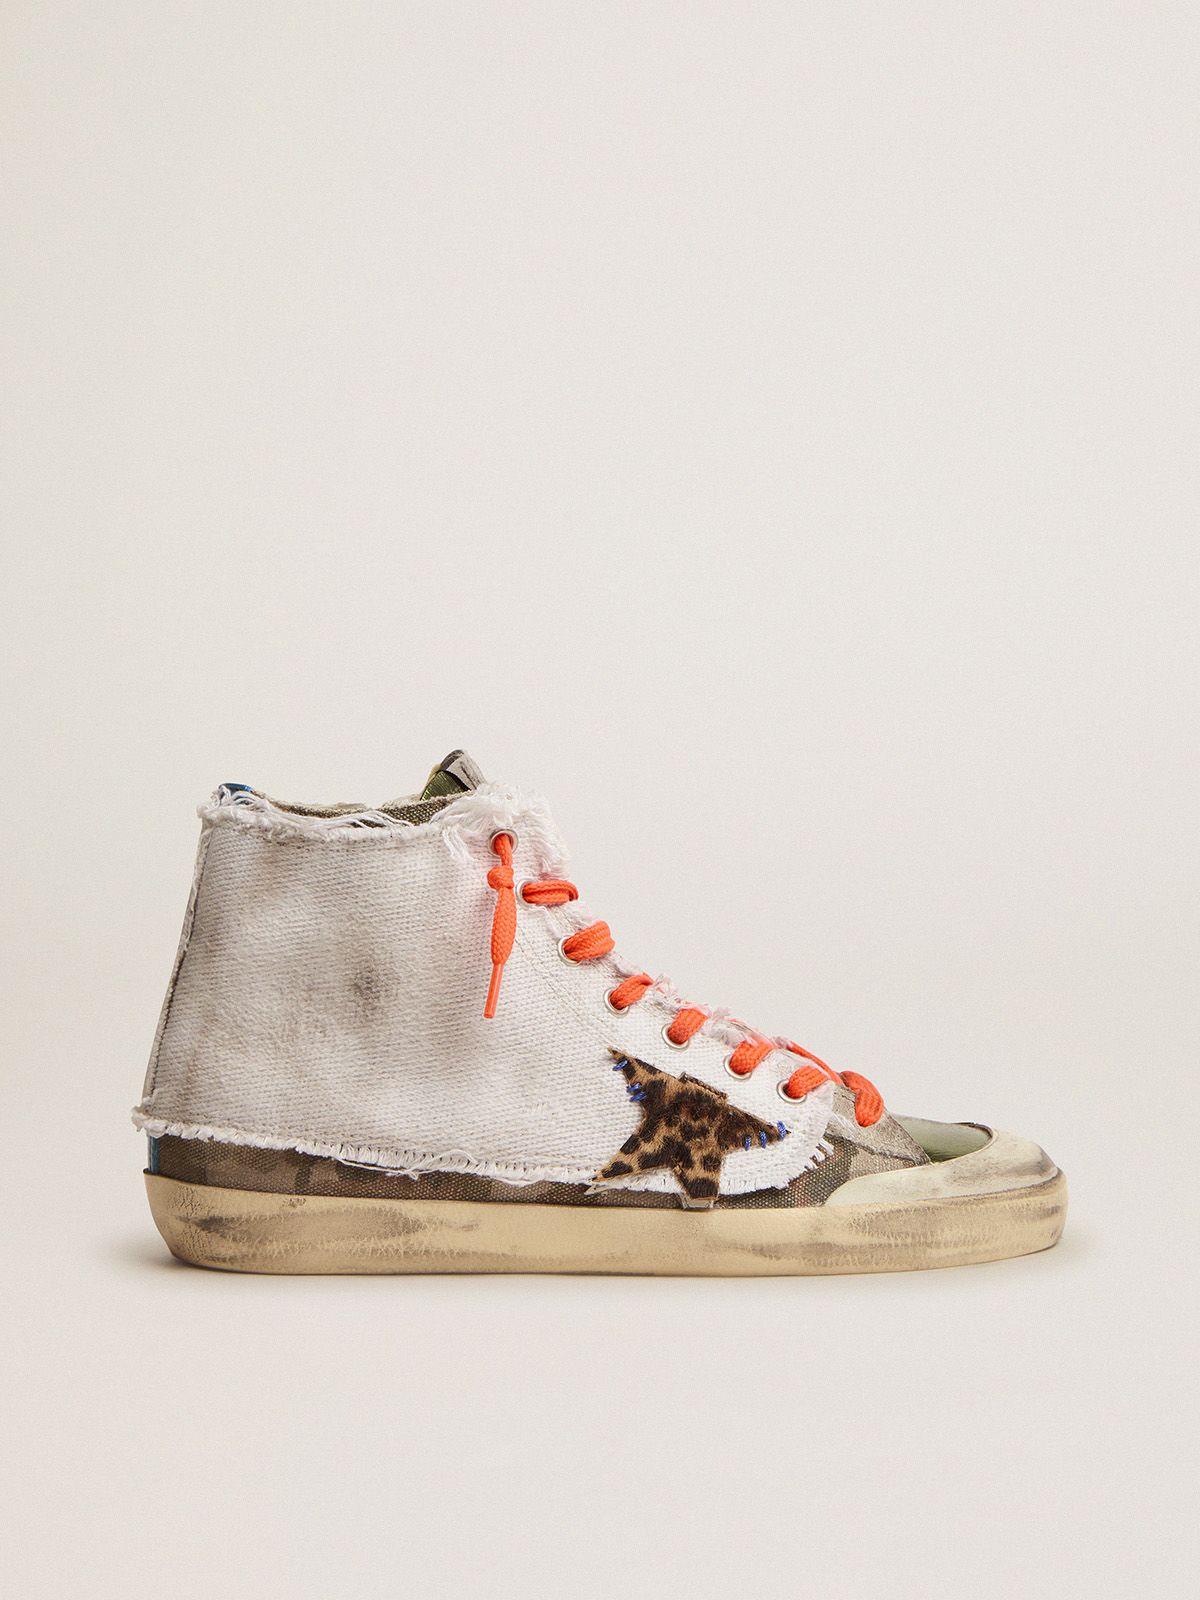 Golden Goose Uomo Saldi Francy Penstar LAB sneakers with camouflage print and superimposed white canvas